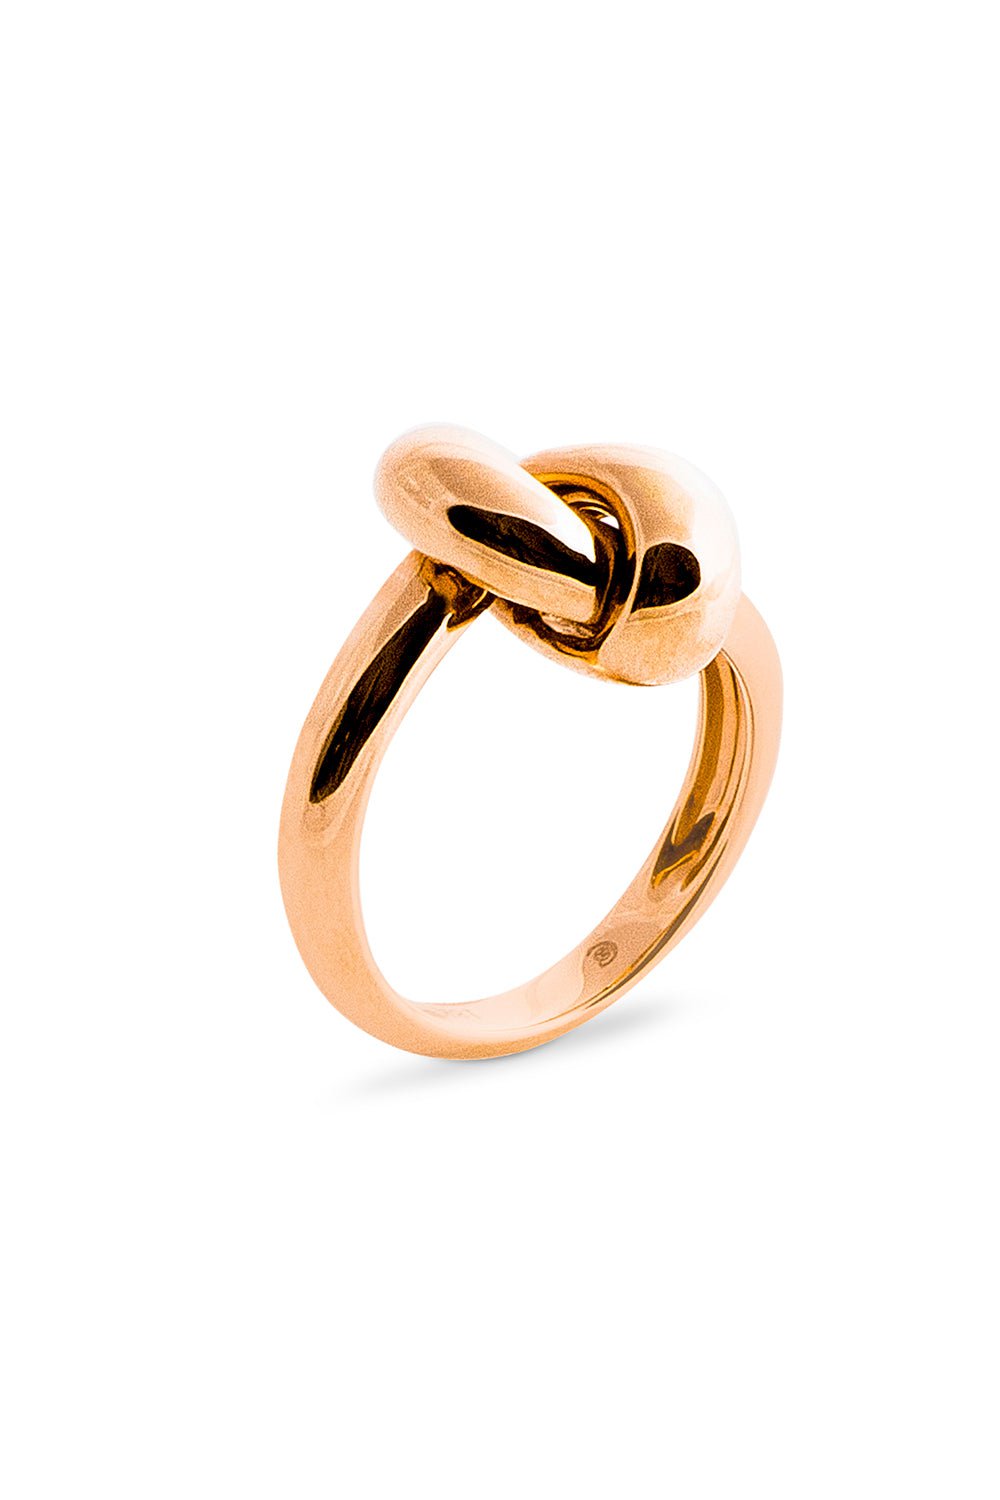 THE LOVE KNOT BY CORALIE-Knot Ring - Rose Gold-ROSE GOLD